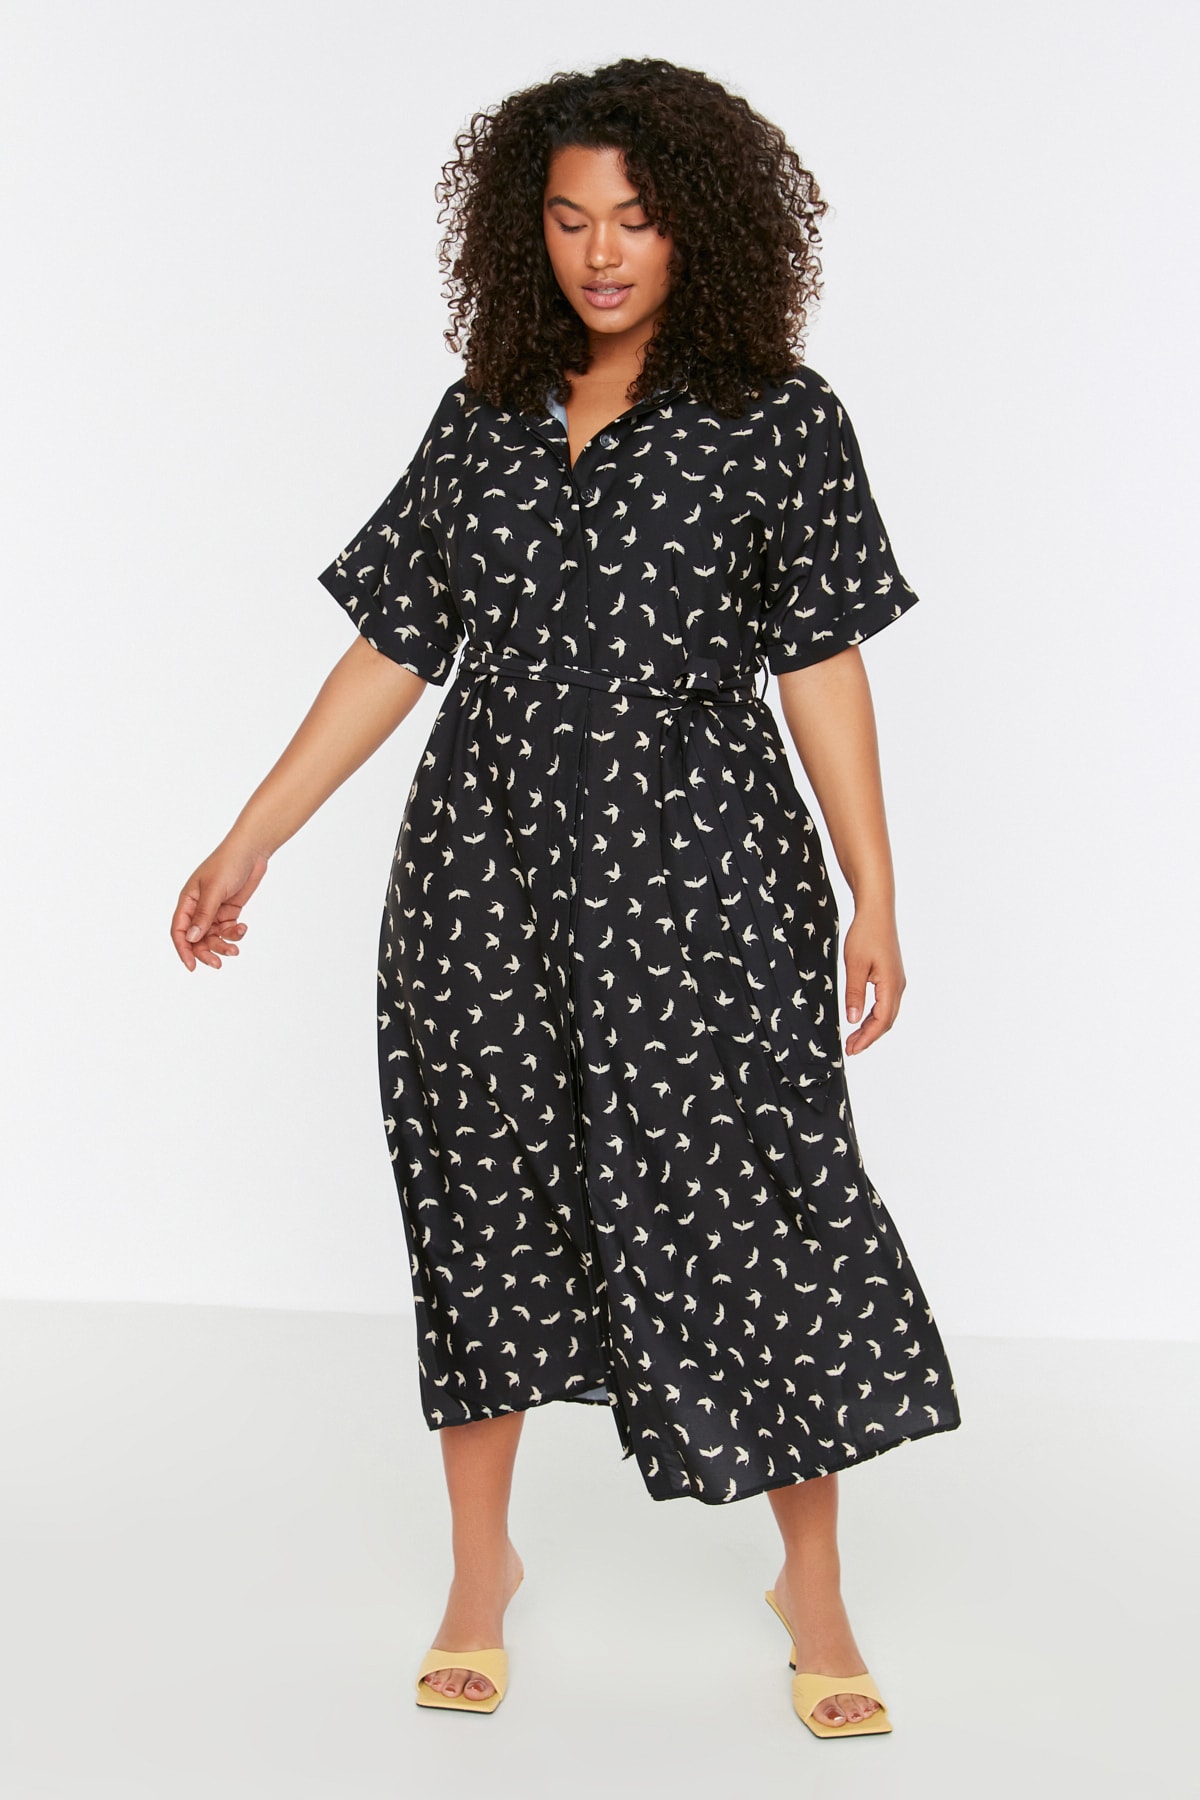 Trendyol Plus Size Black Patterned Woven Dress with Belted and Slits